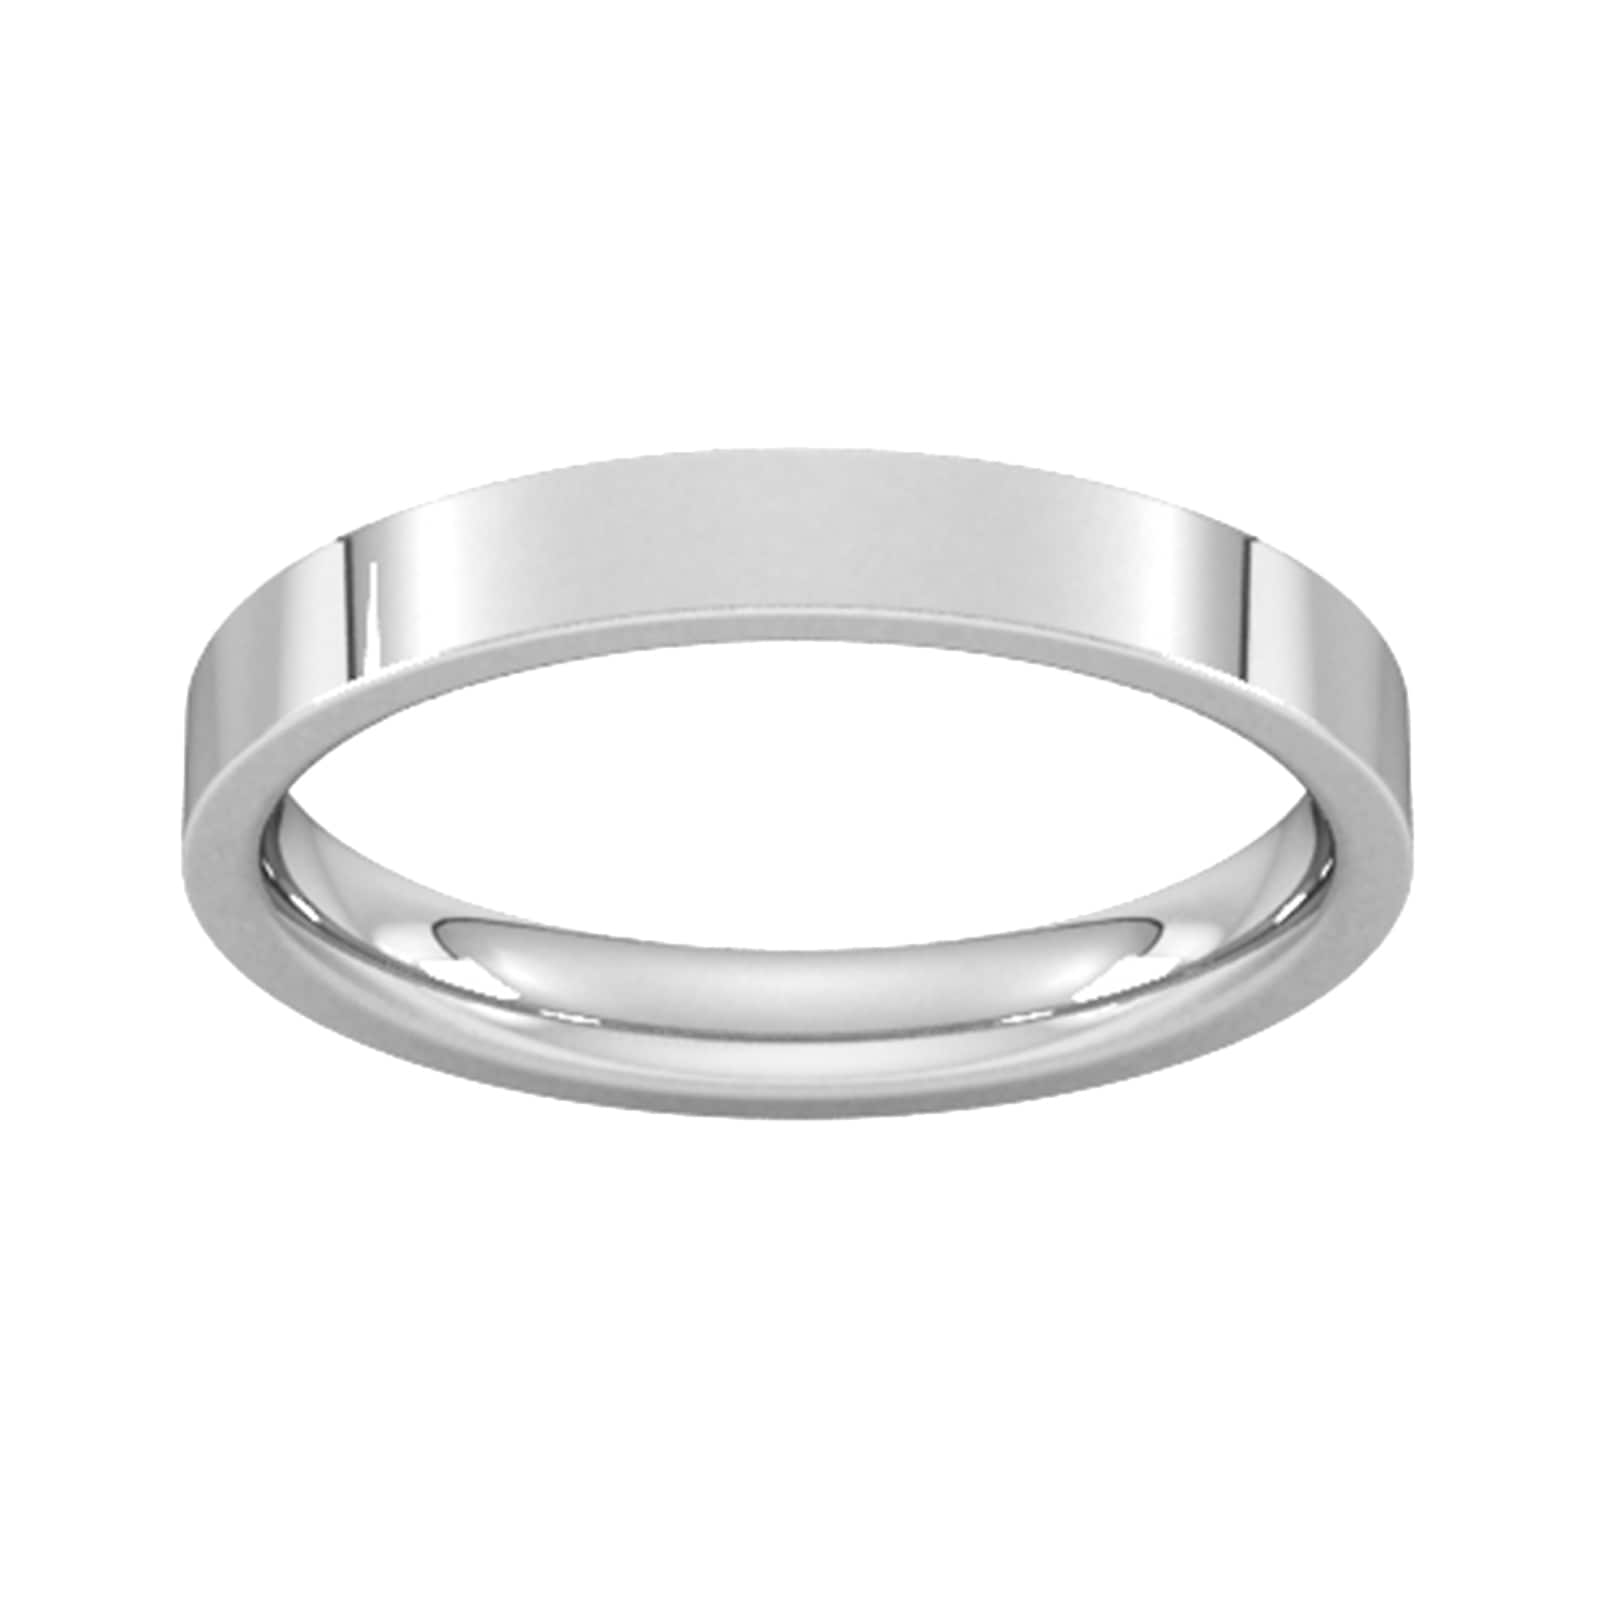 3mm Flat Court Heavy Wedding Ring In 9 Carat White Gold - Ring Size R